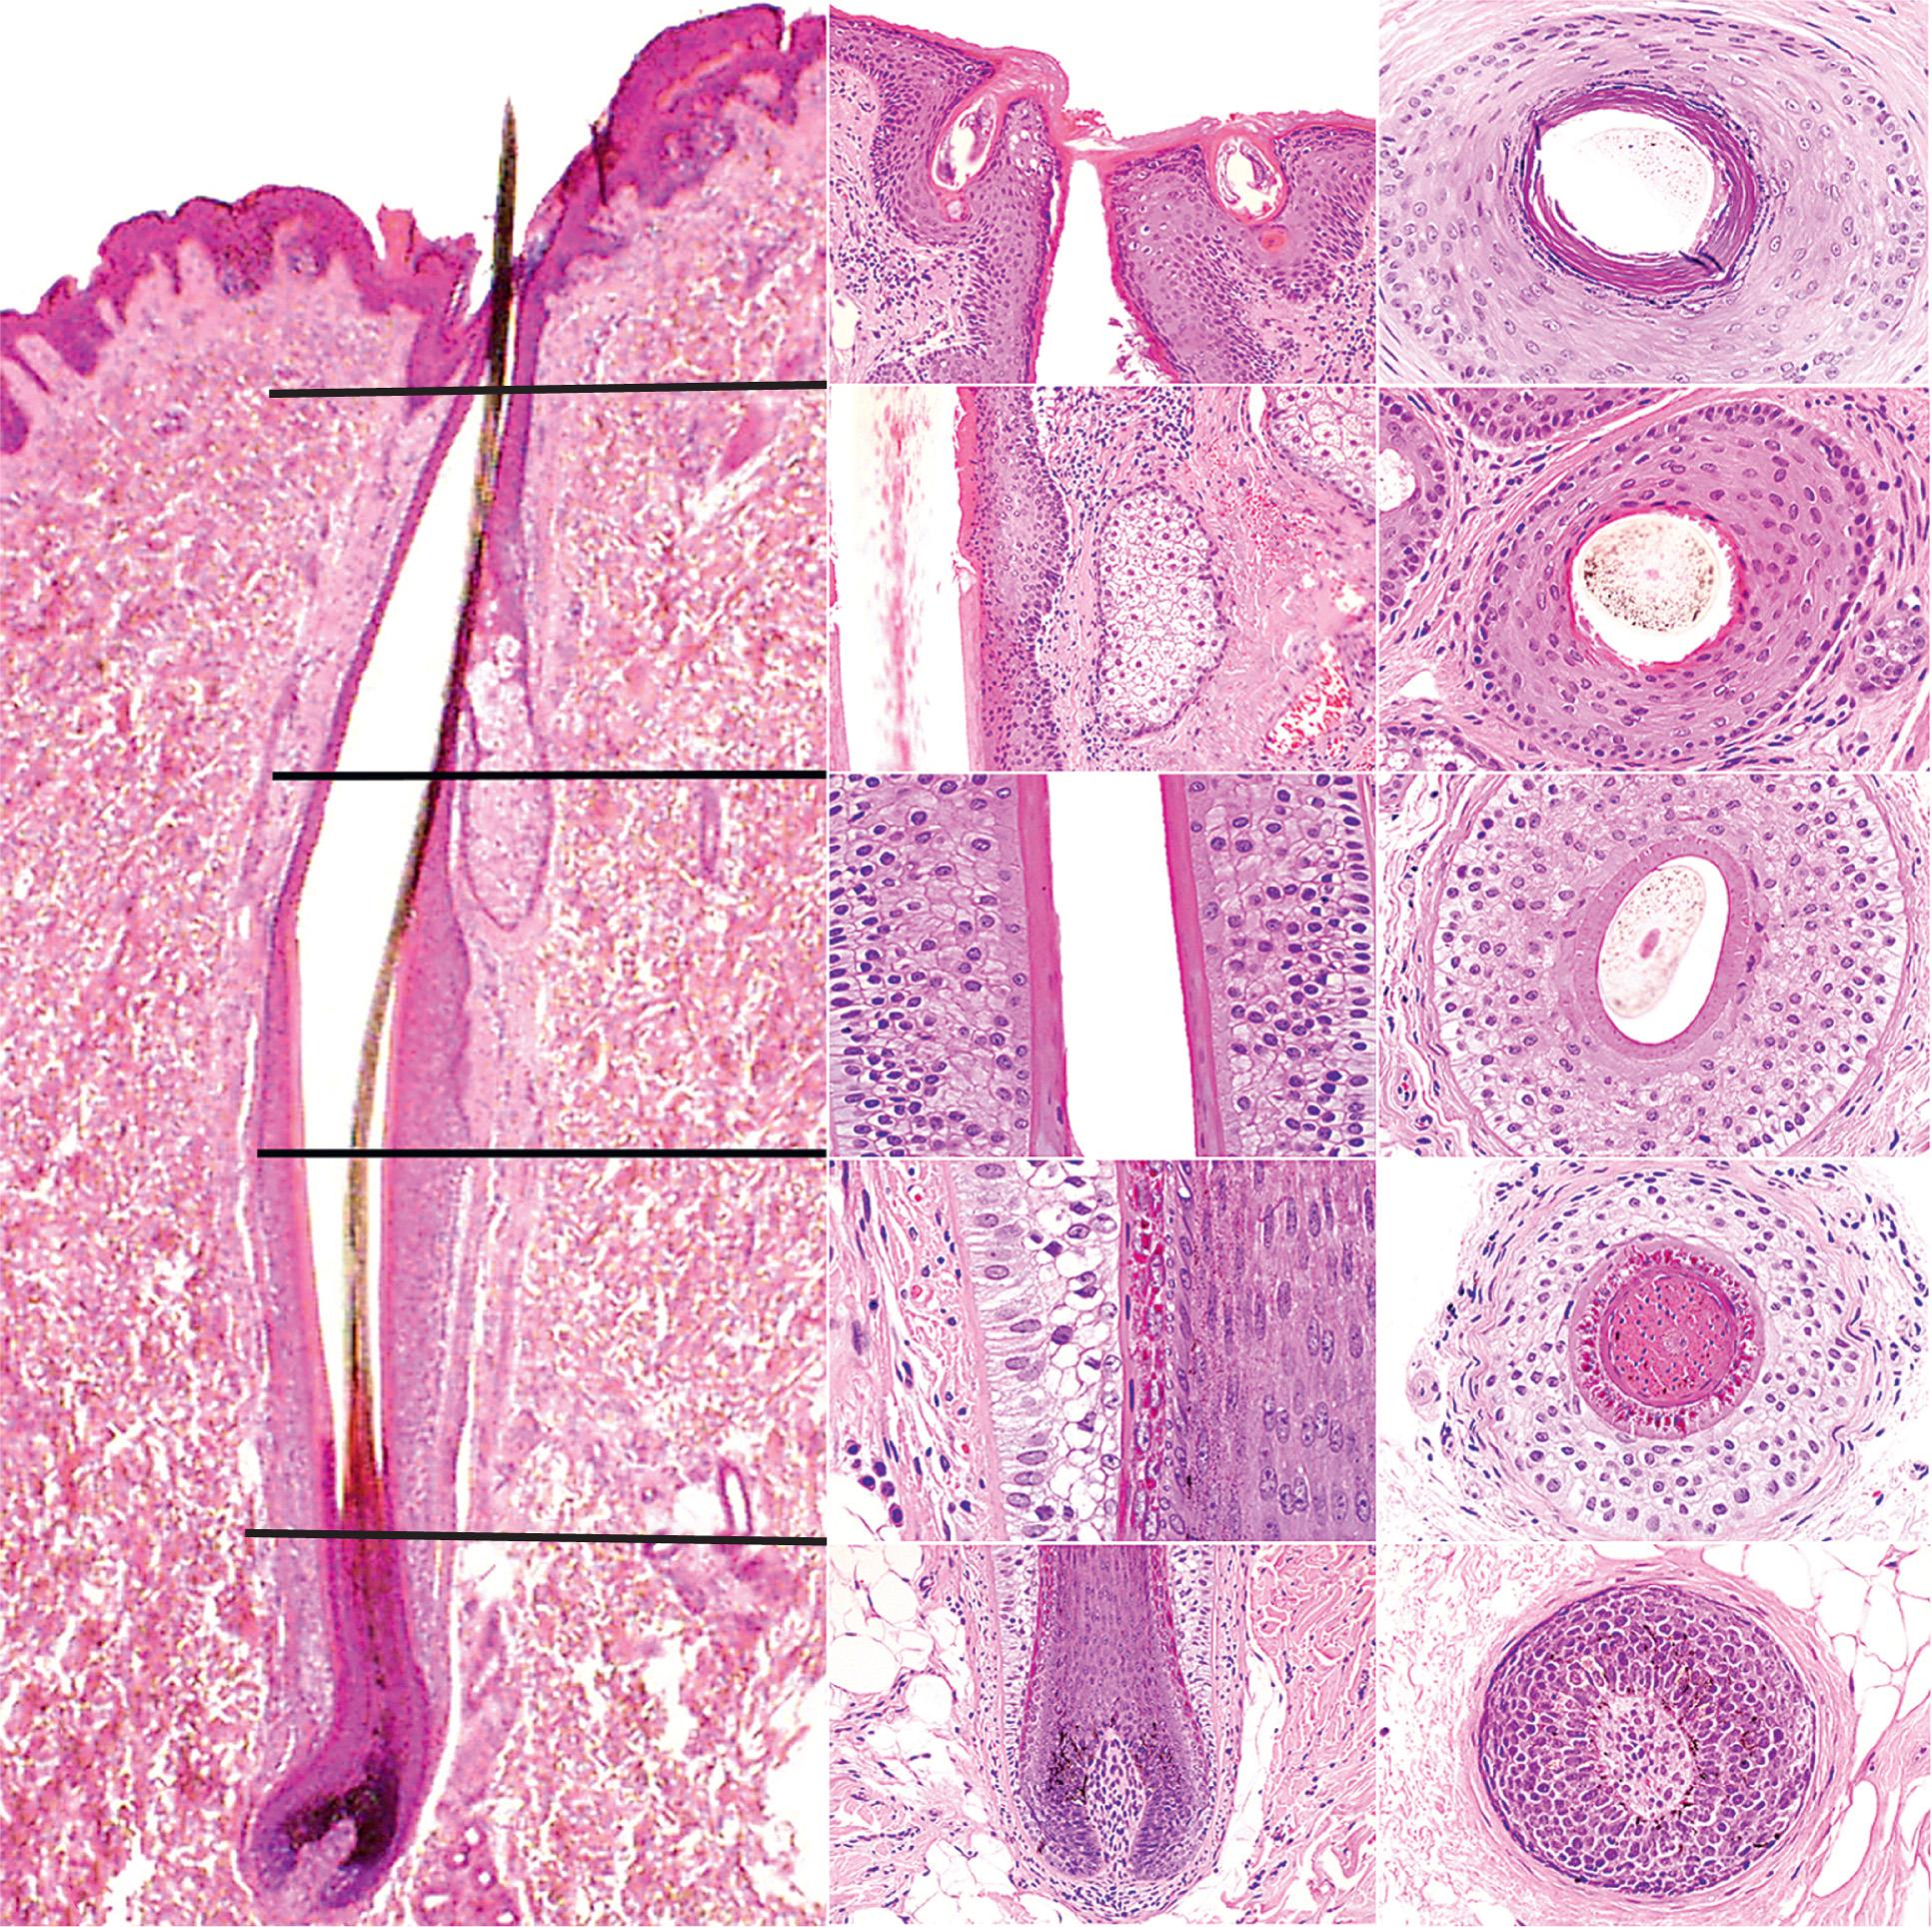 Fig. 69.8, Vertical and horizontal sections of a hair follicle cut at different levels (from bottom to top).